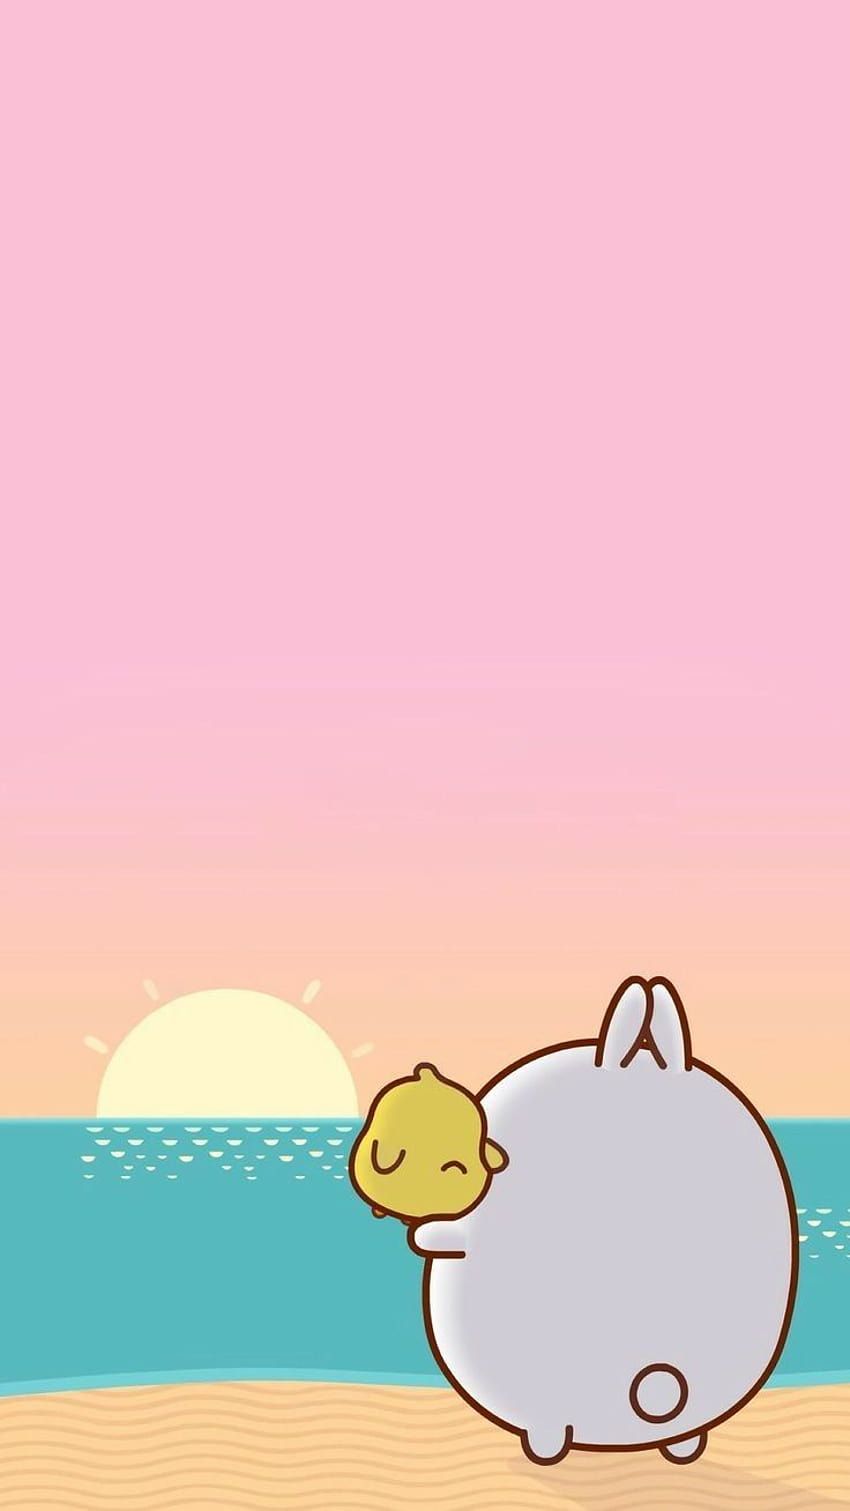 A cute Molang rabbit wallpaper with a sunset and the ocean - Molang